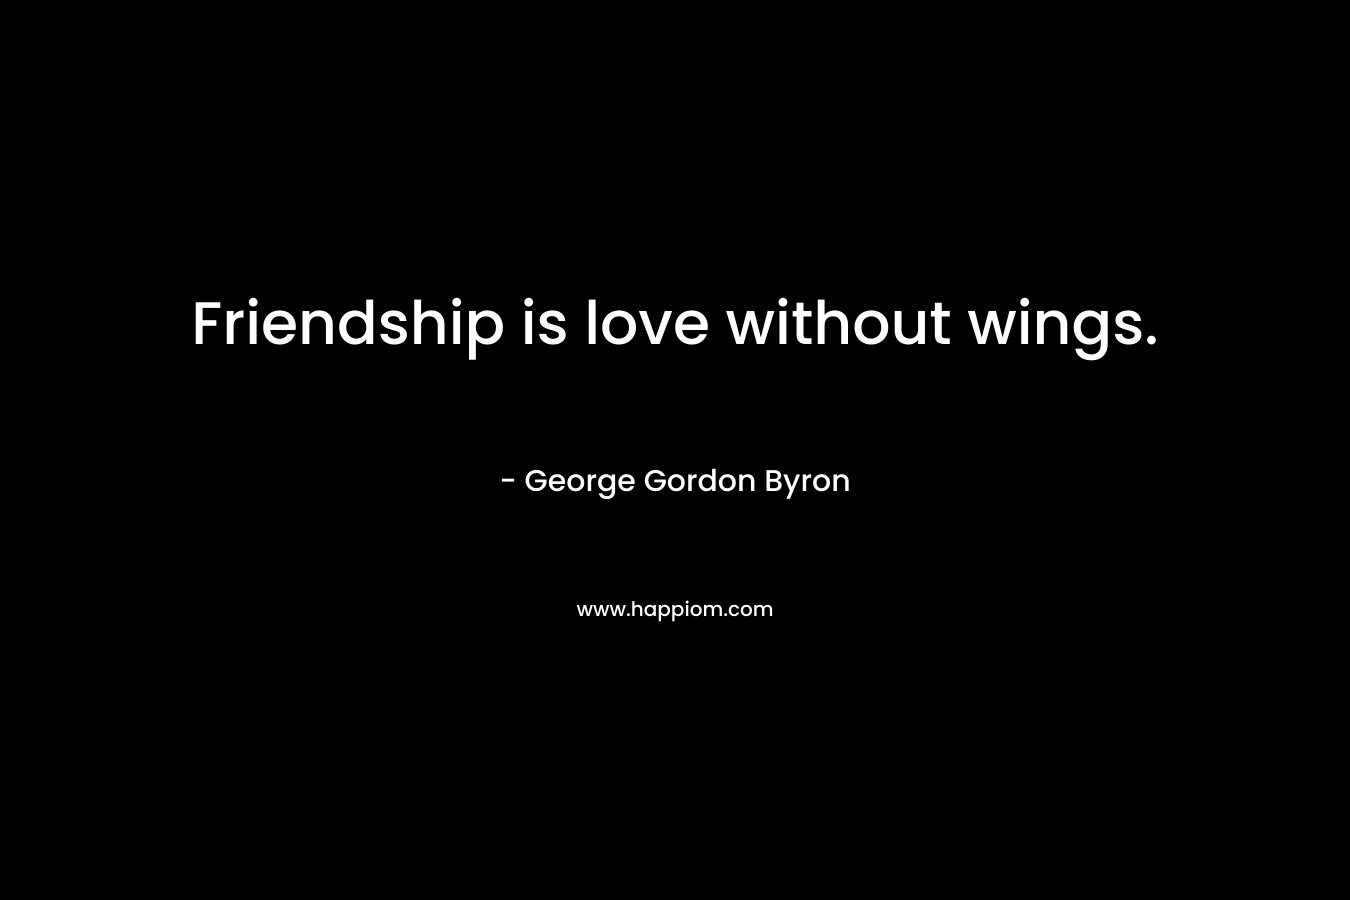 Friendship is love without wings.